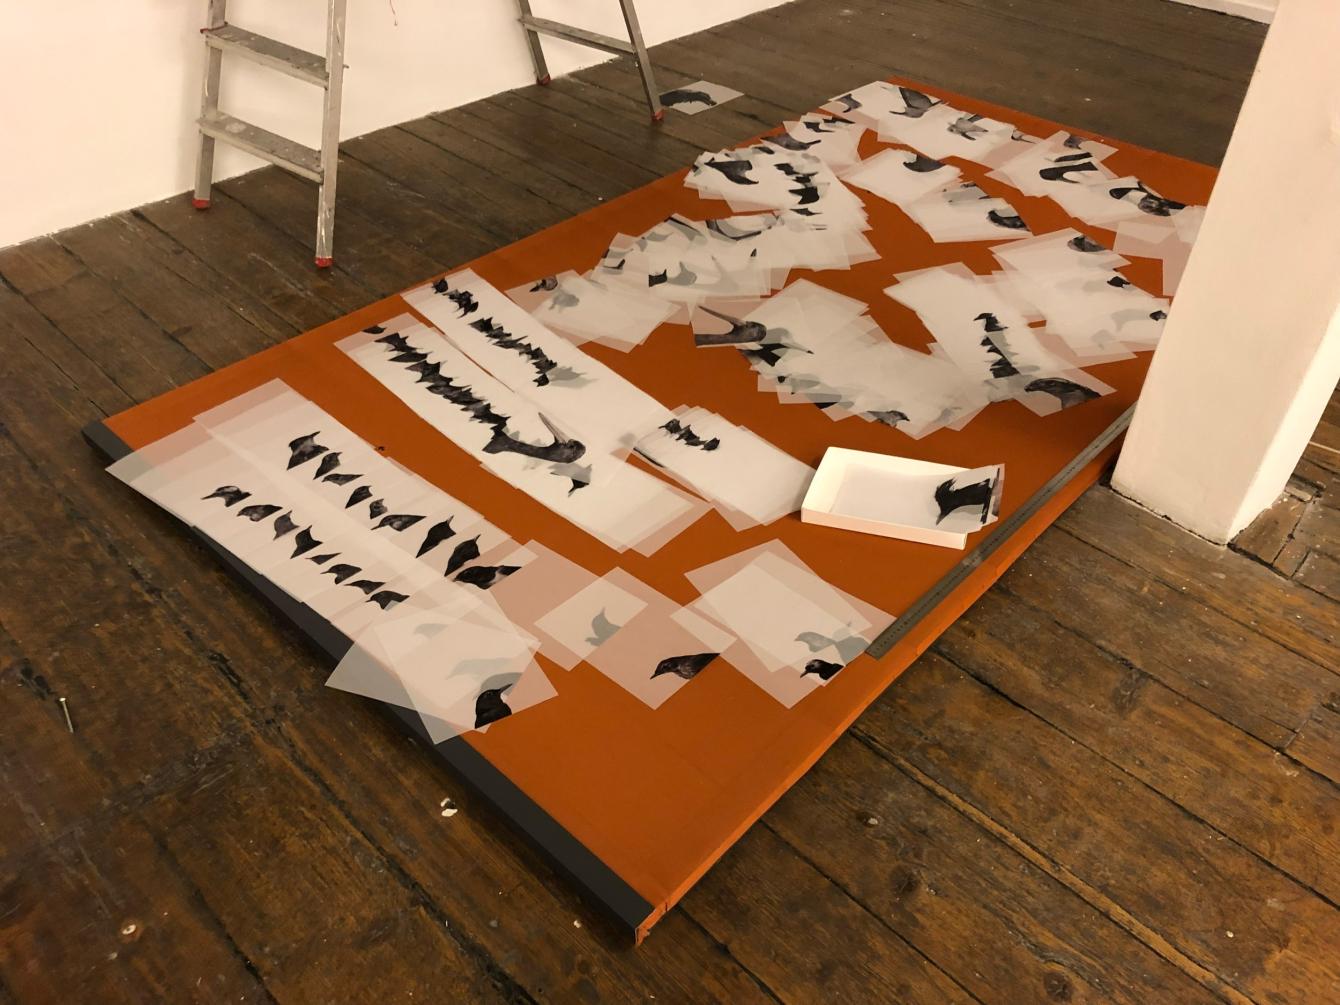 Printed images of birds lying on the floor